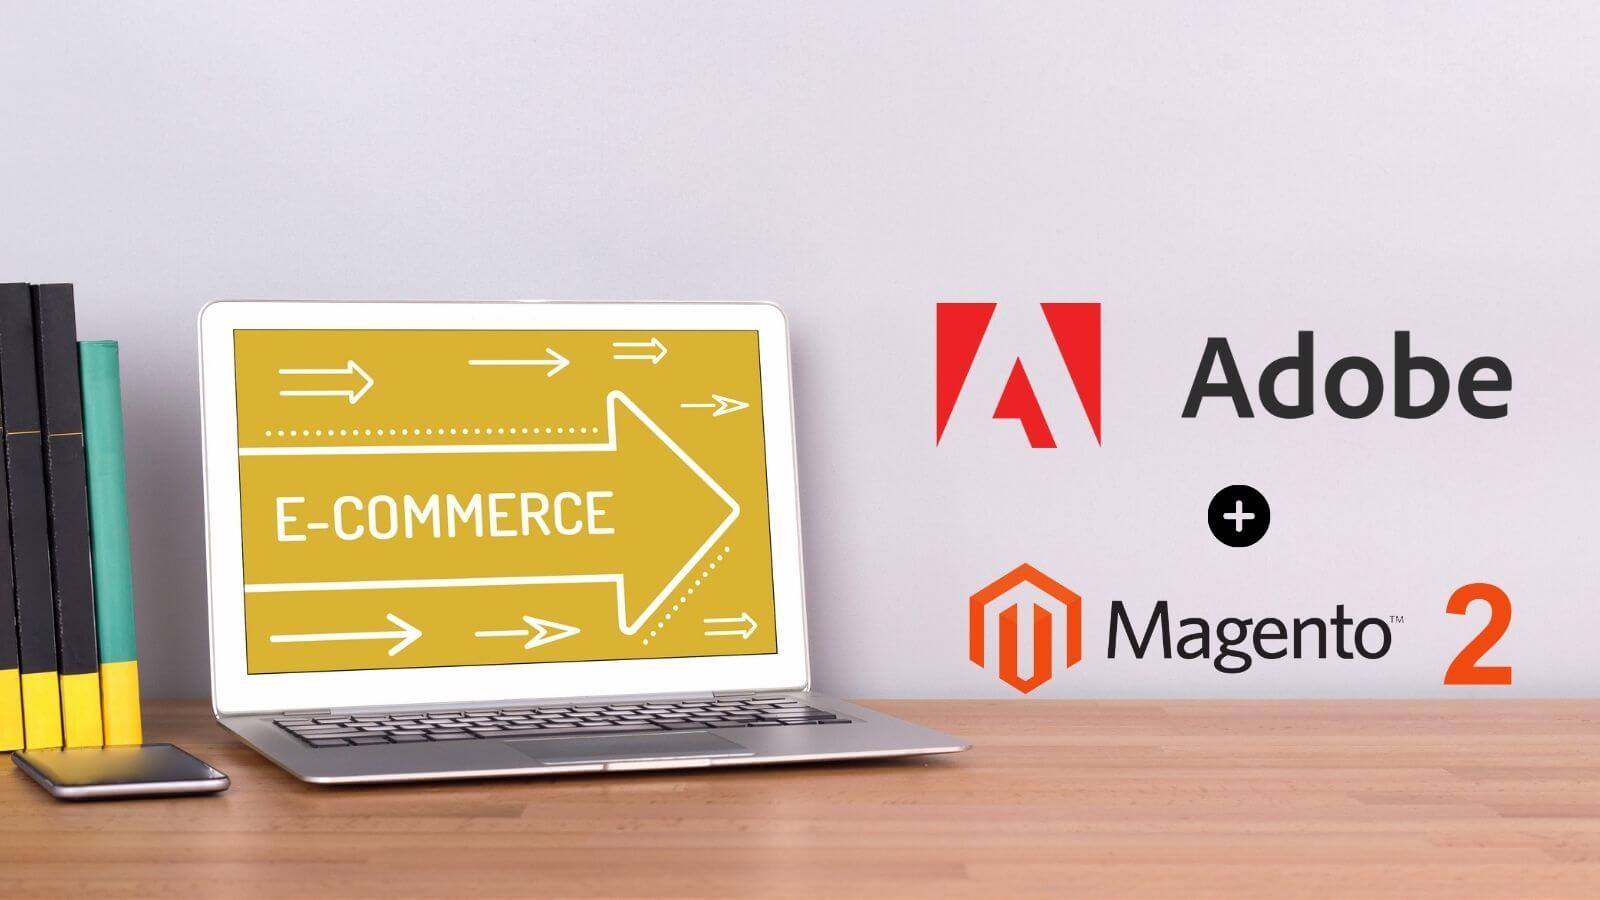 Adobe to acquire Magento: What happened after the Magento acquisition?